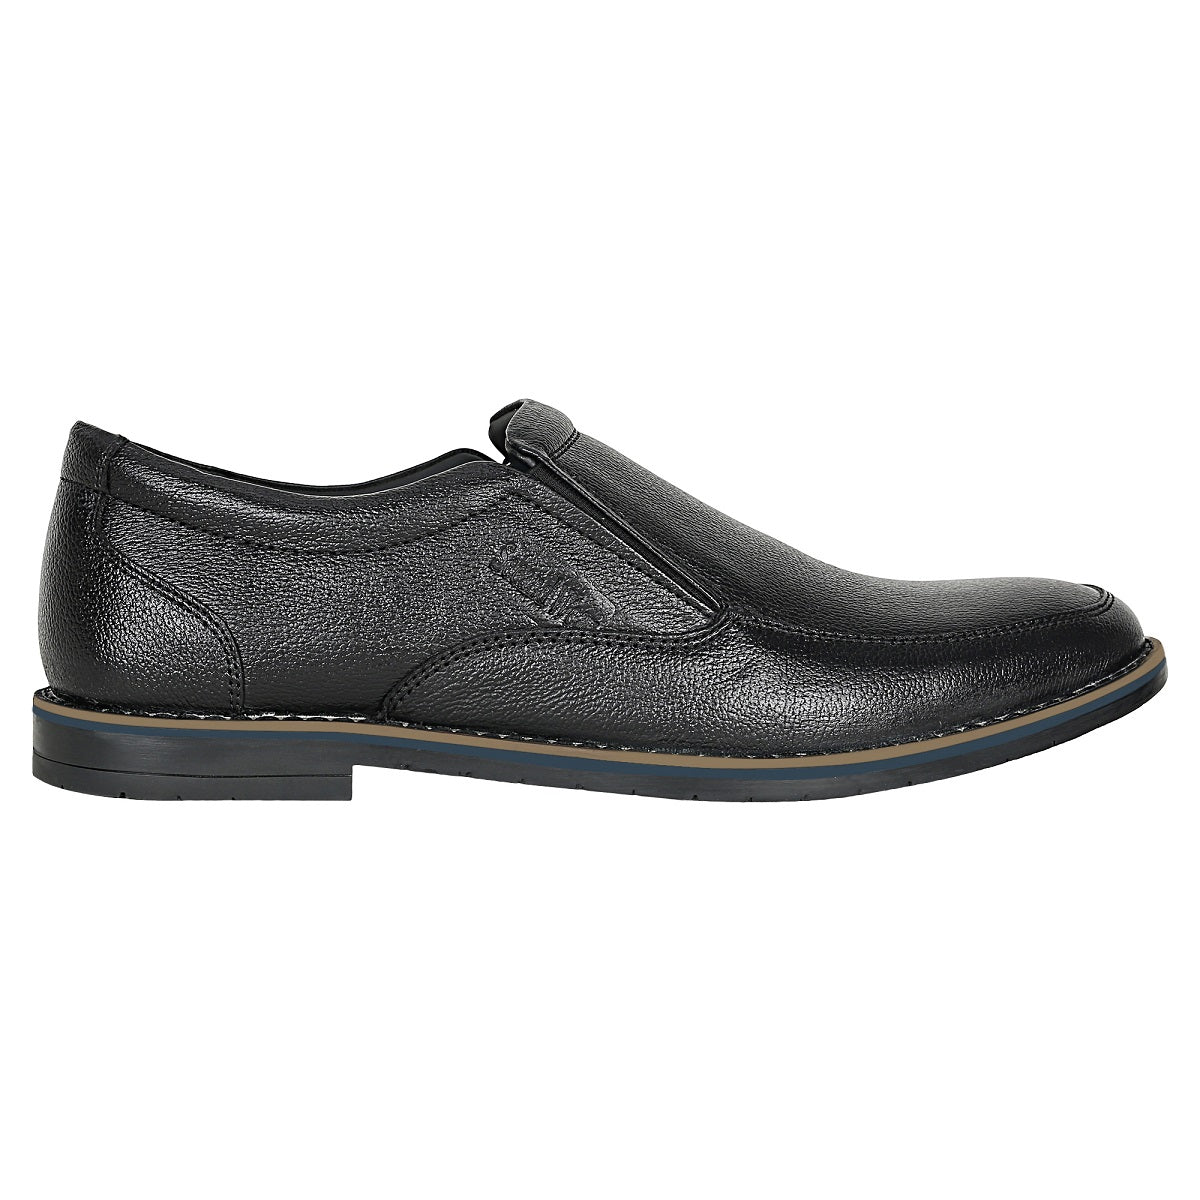 Slip on Formal Shoes -  Used